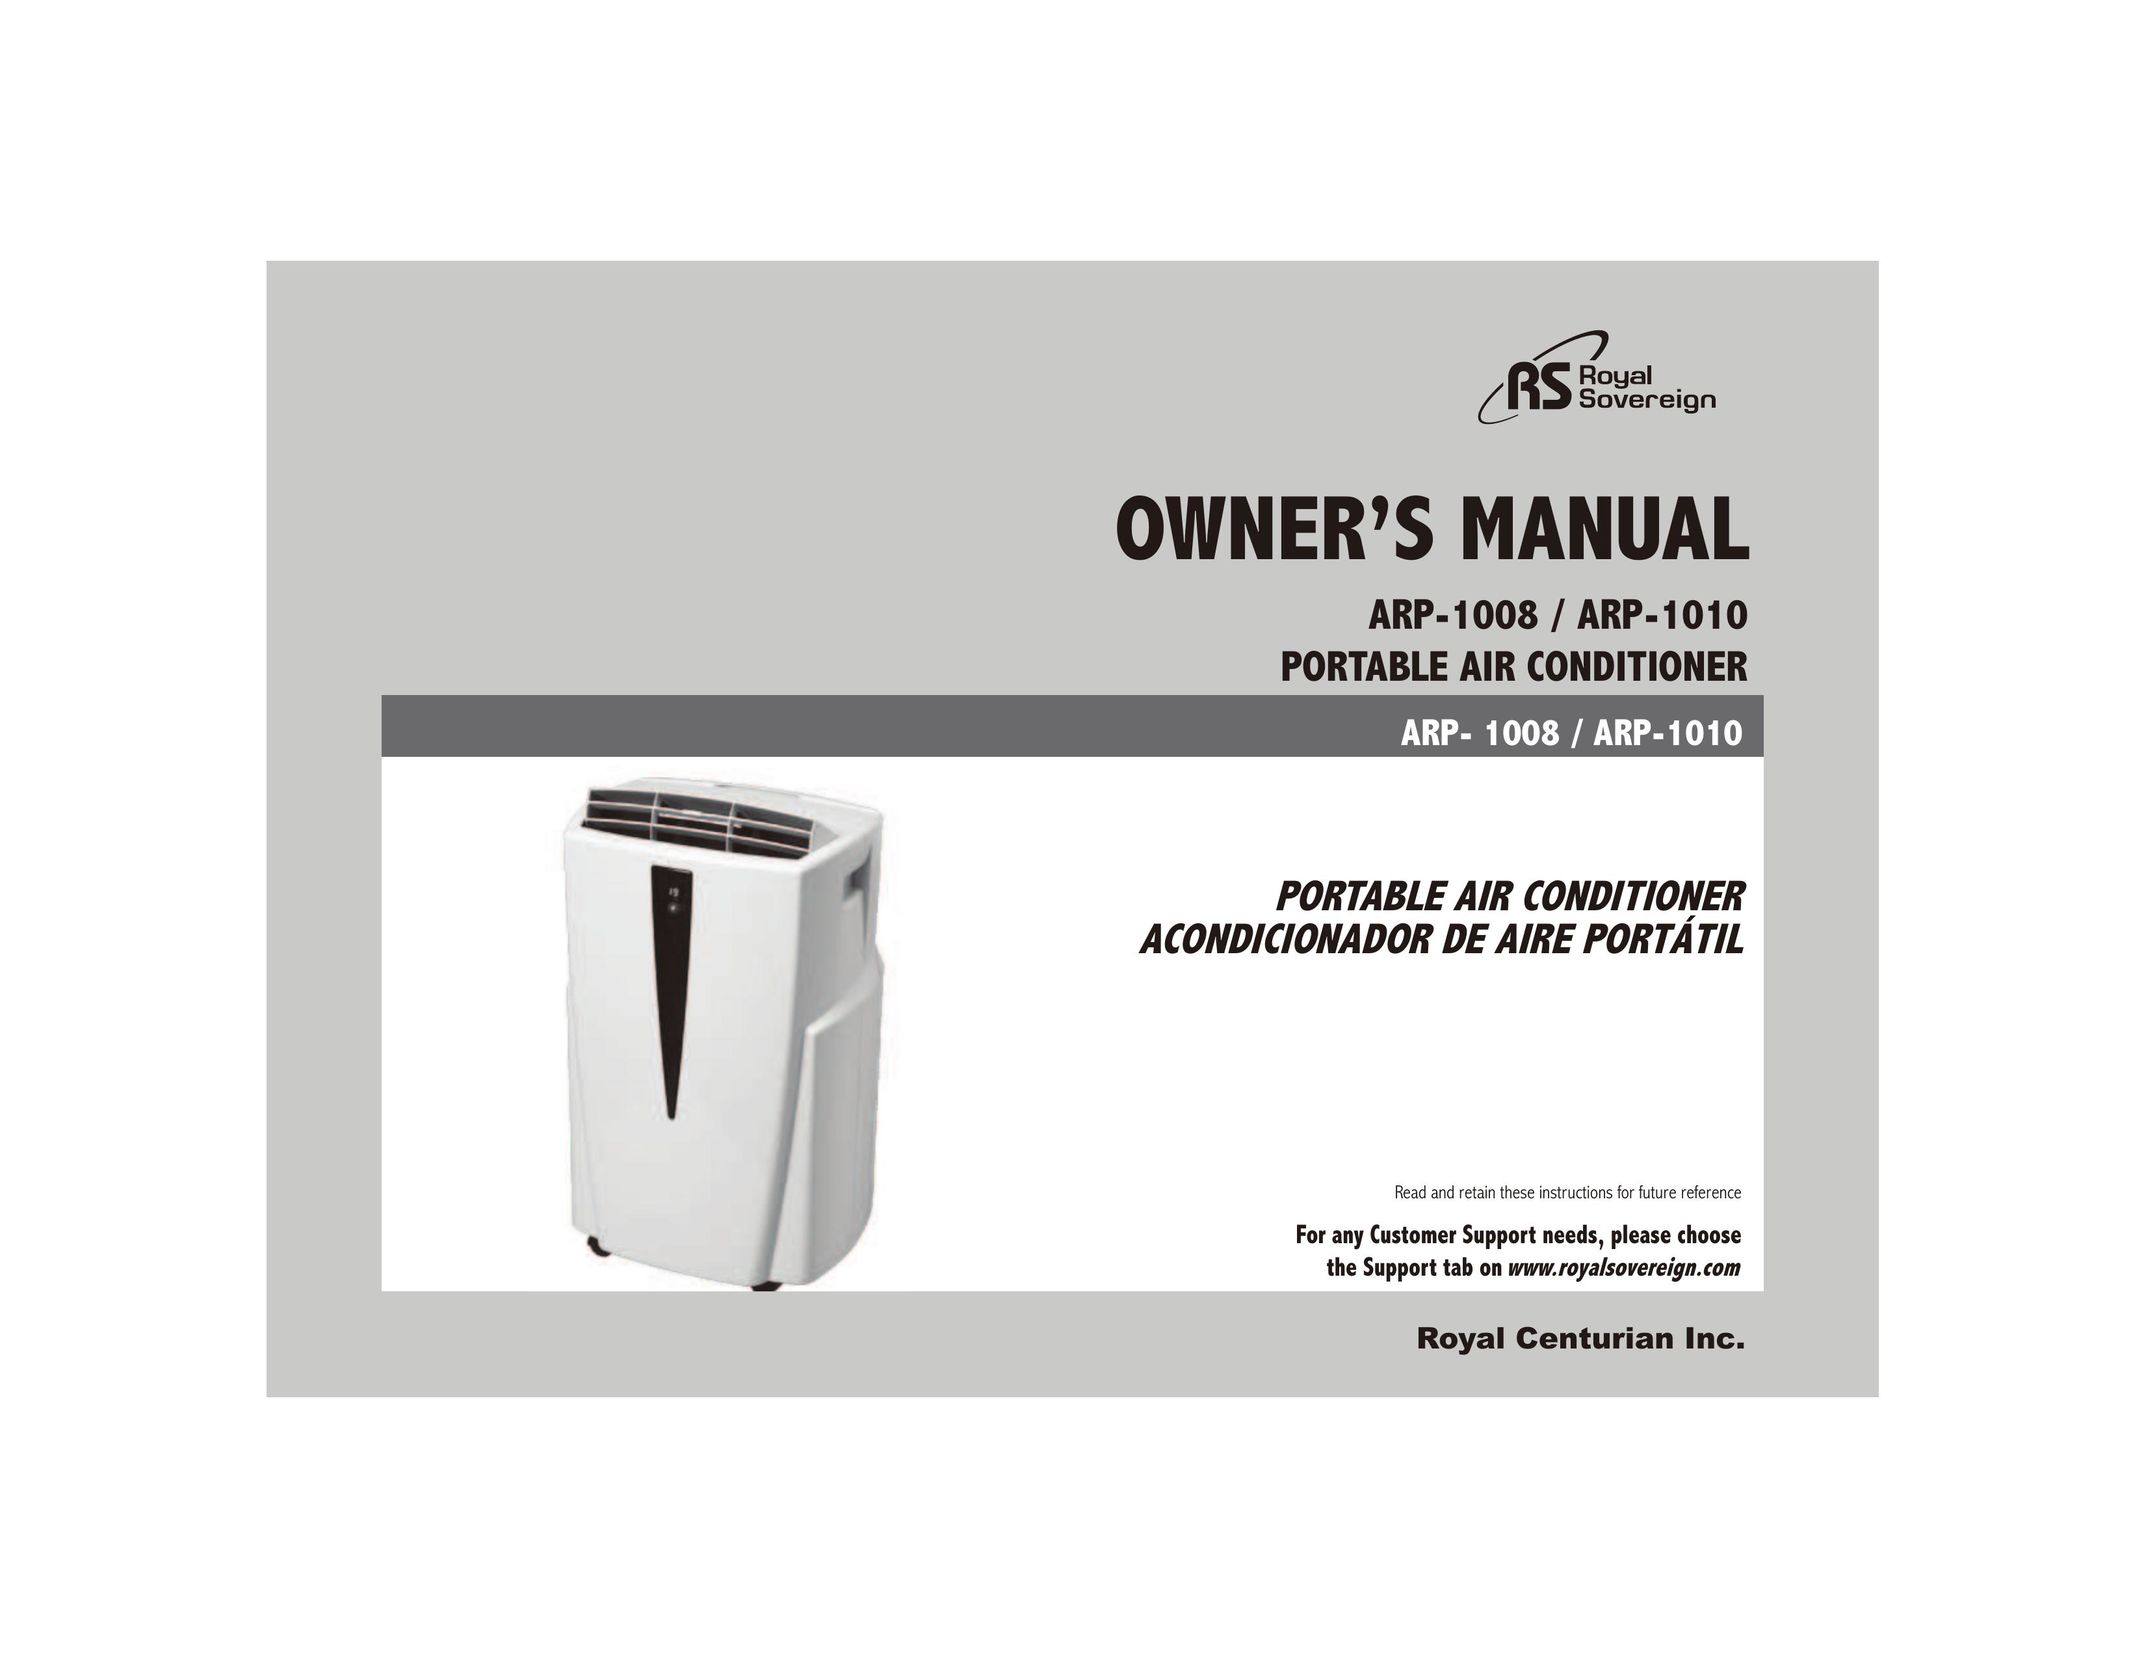 Royal Sovereign ARP- 1008 Air Conditioner User Manual